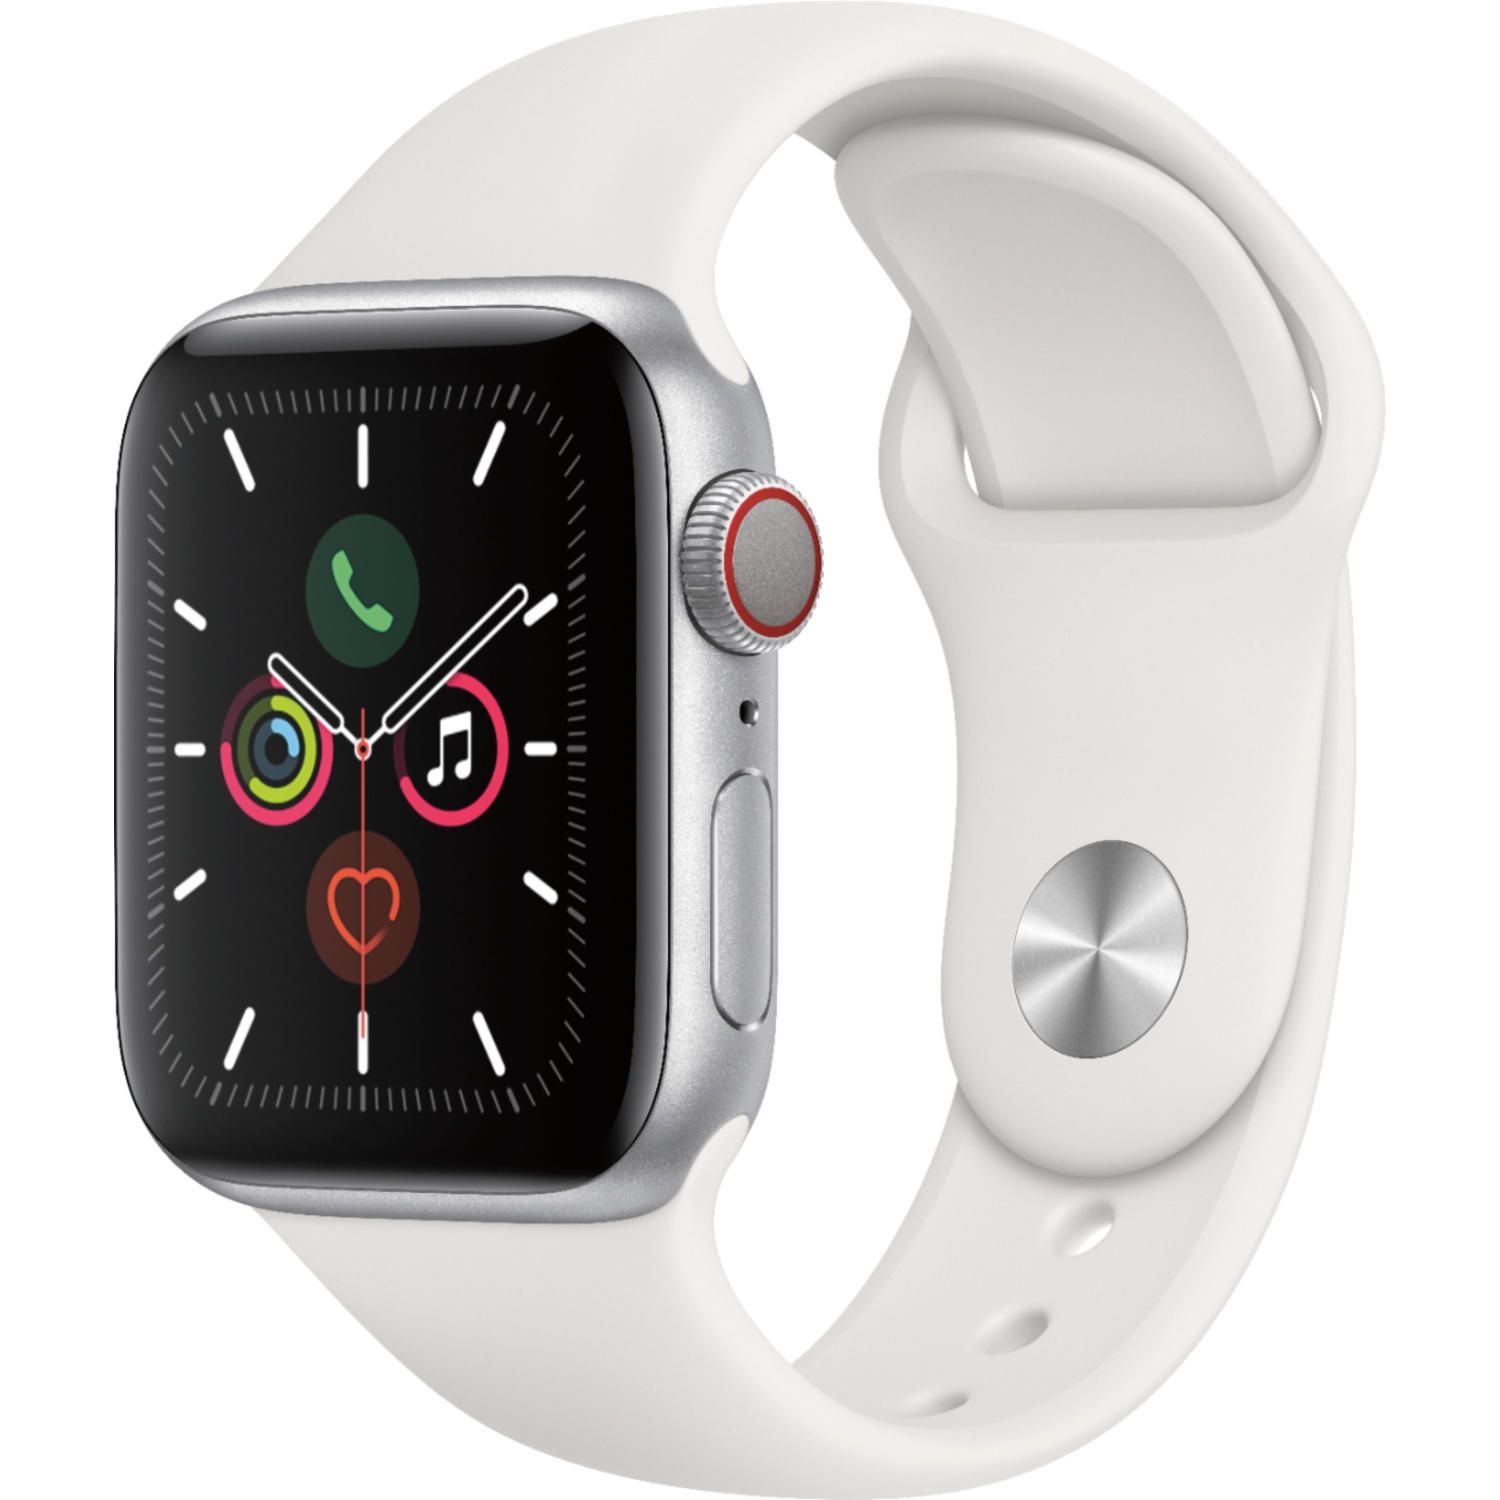 Refurbished (Good) - Apple Watch Series 5 (GPS + Cellular) 44mm Silver Aluminum with White Sport Band - Certified Refurbished